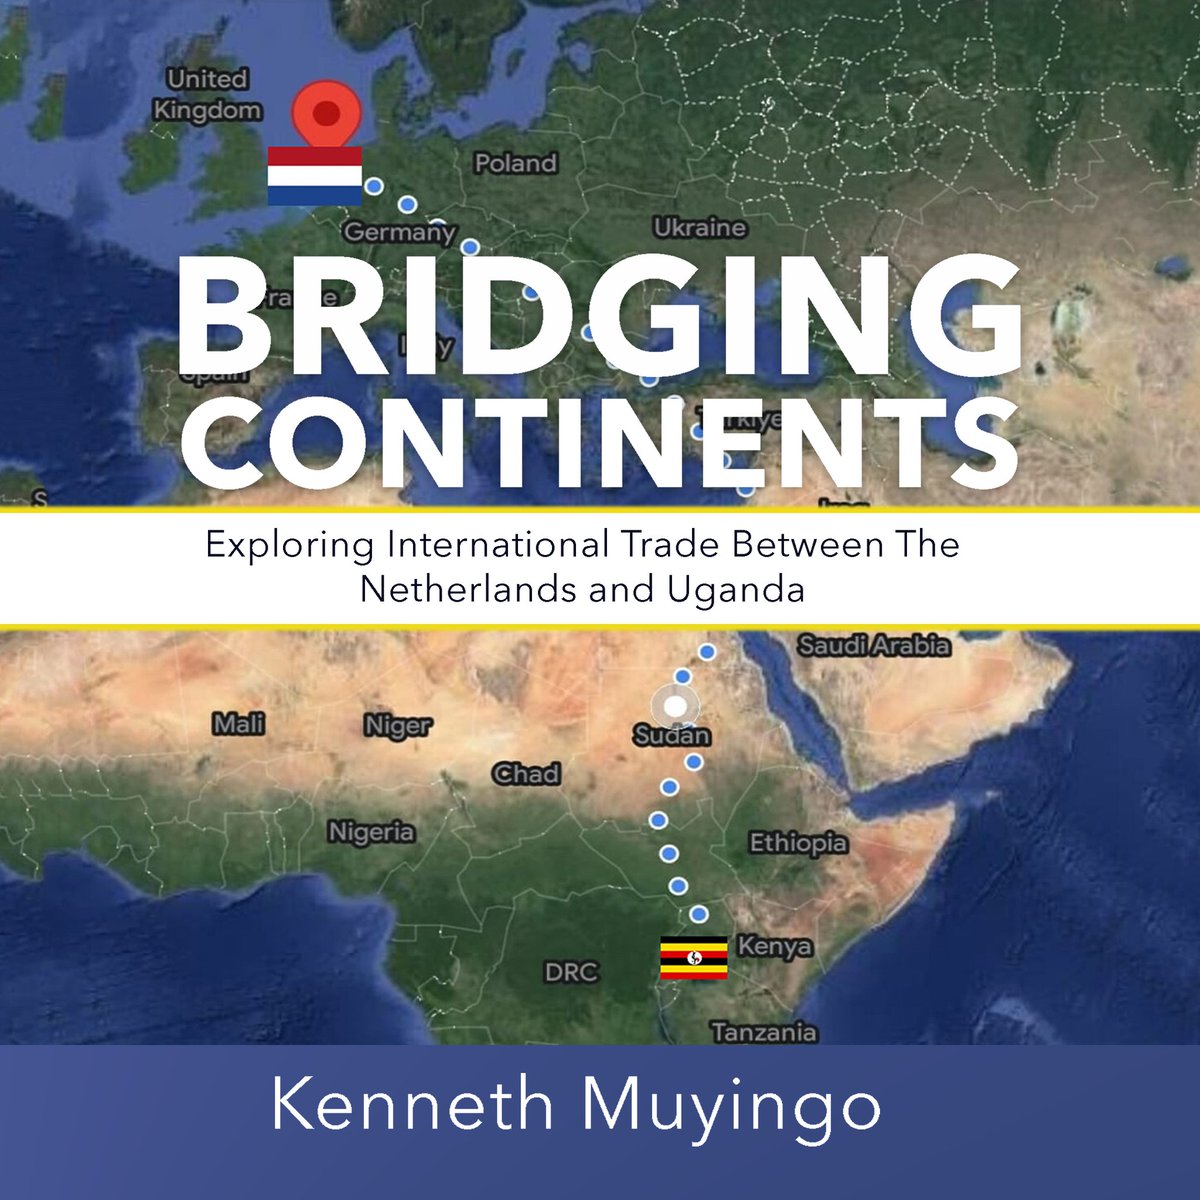 Look out for my new book: Bridging Continents: Exploring International Trade between the Netherlands and Uganda. 

Out this August in Paperback, Hardcover, and Ebook

#bridgingcontinents #Netherlands #Uganda #internationaltrade